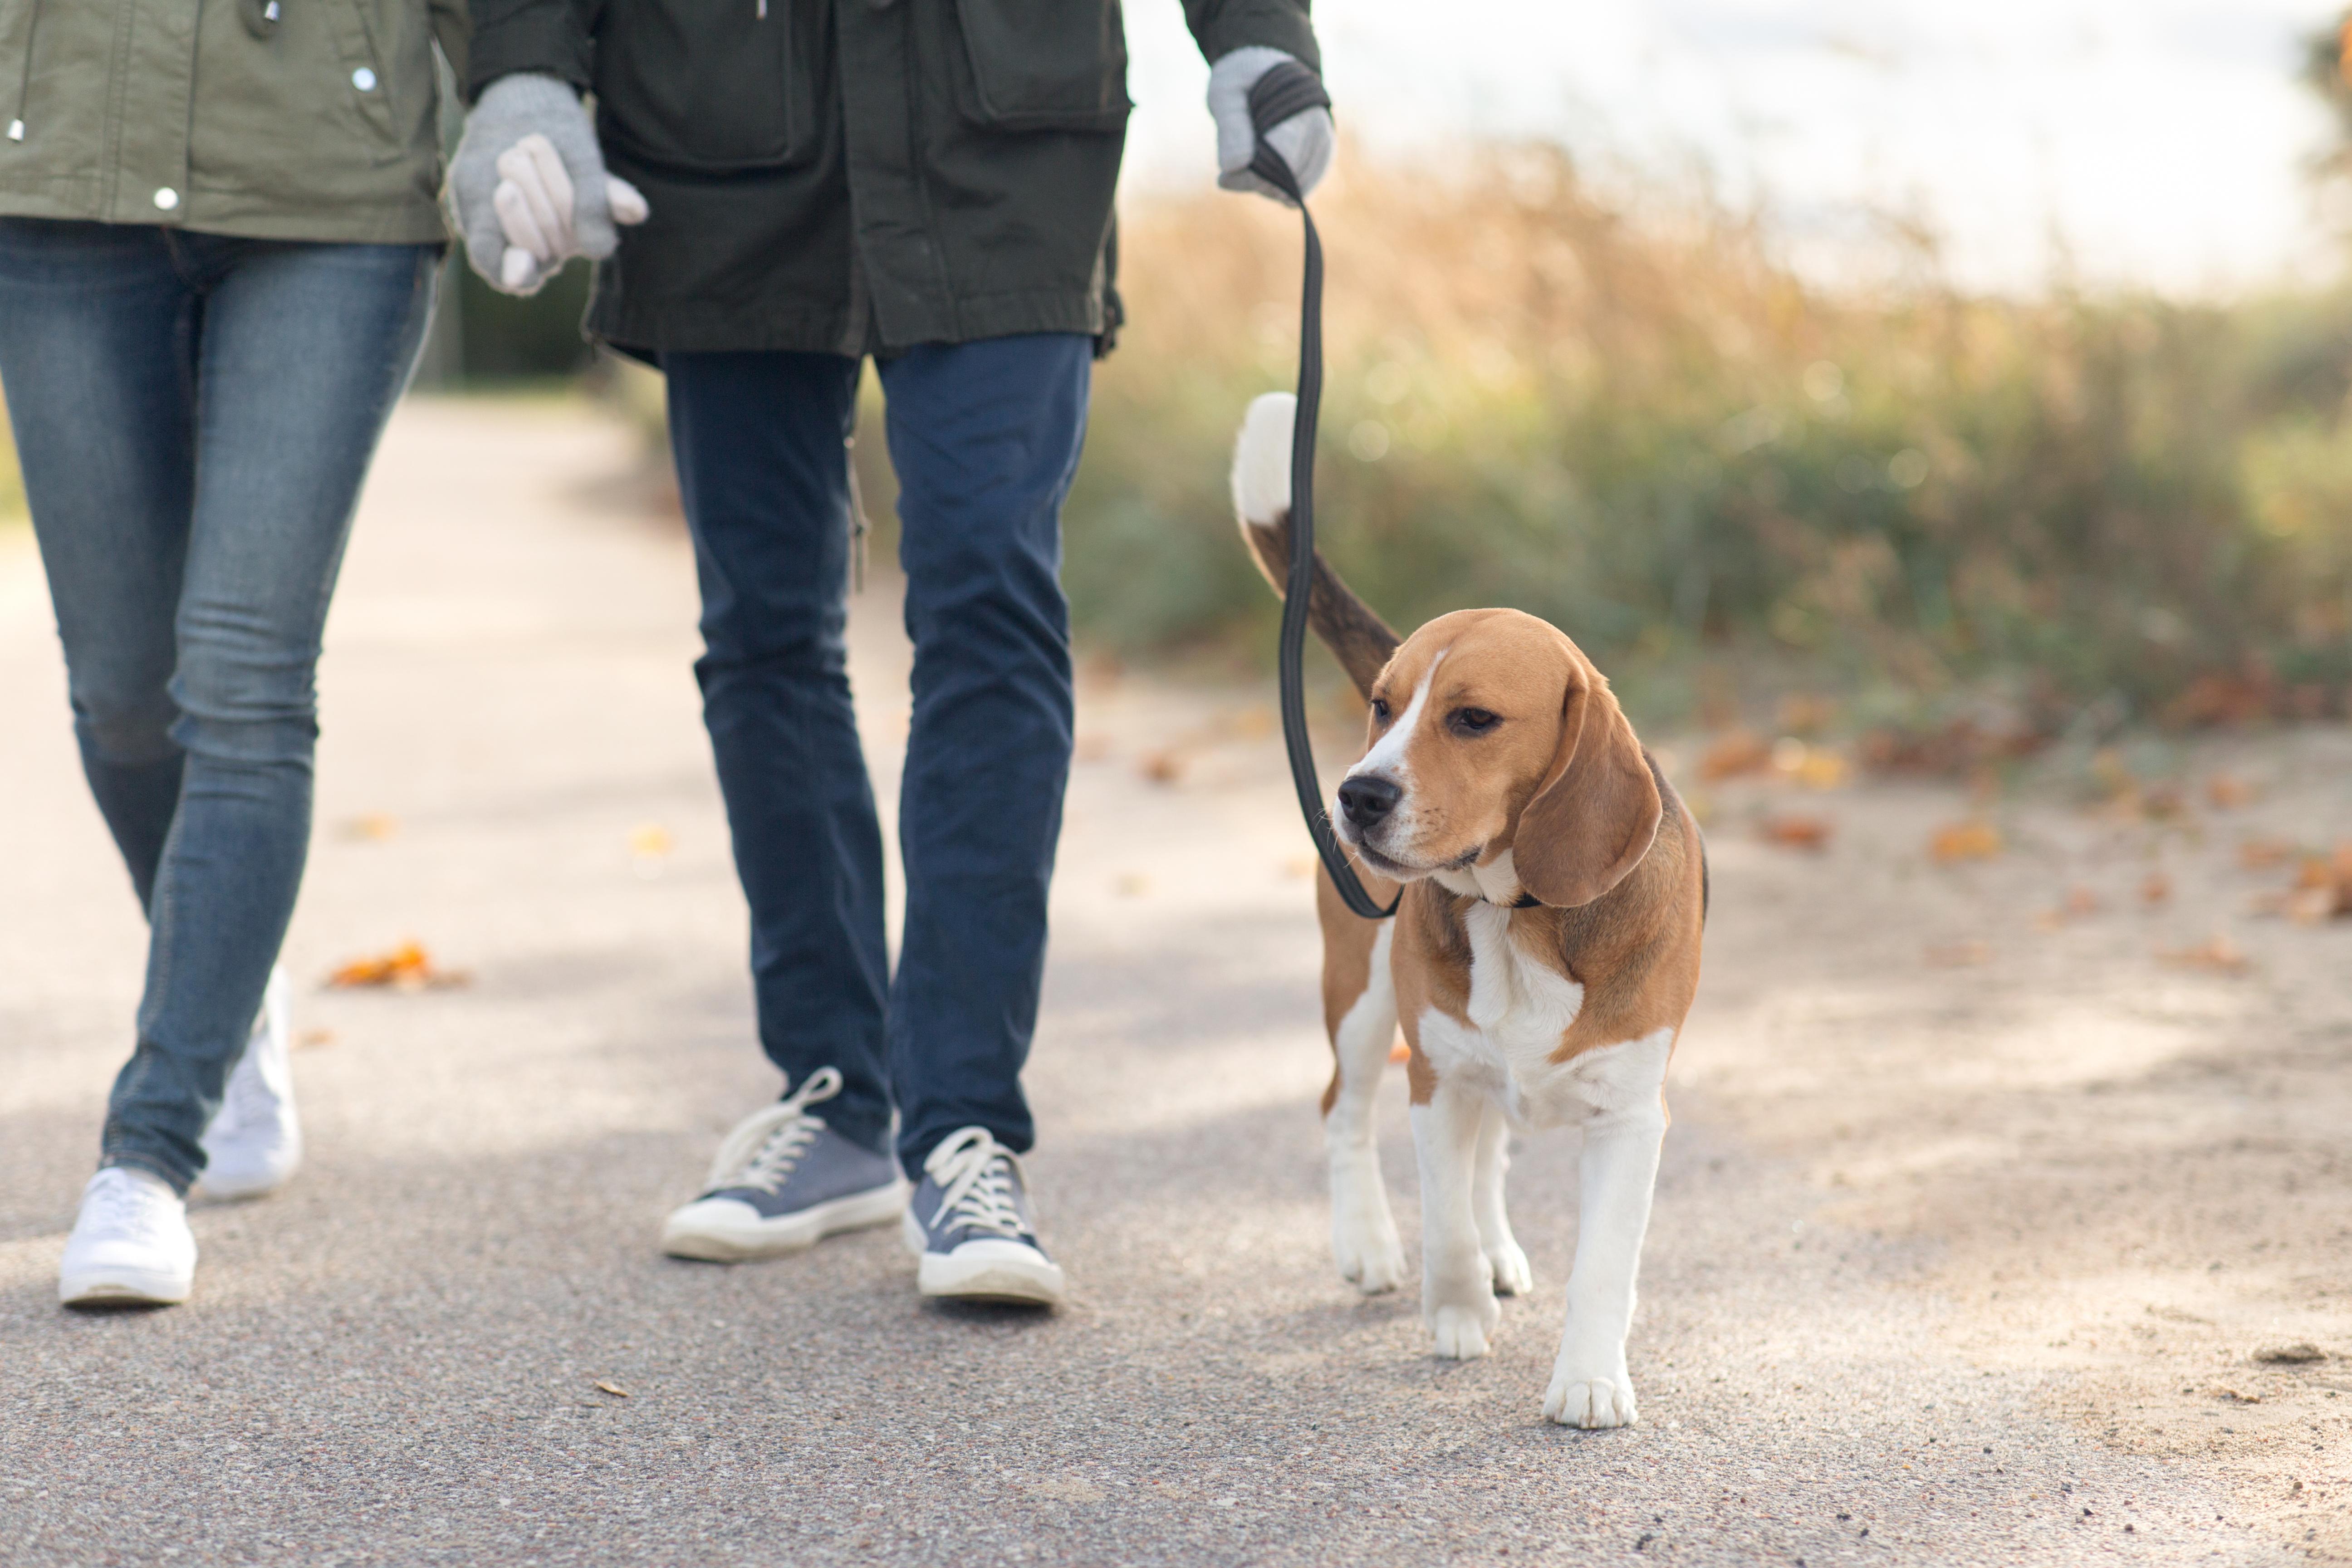 Loose Leash Walking: Teaching Your Dog Not To Pull On Leash Using Positive Training